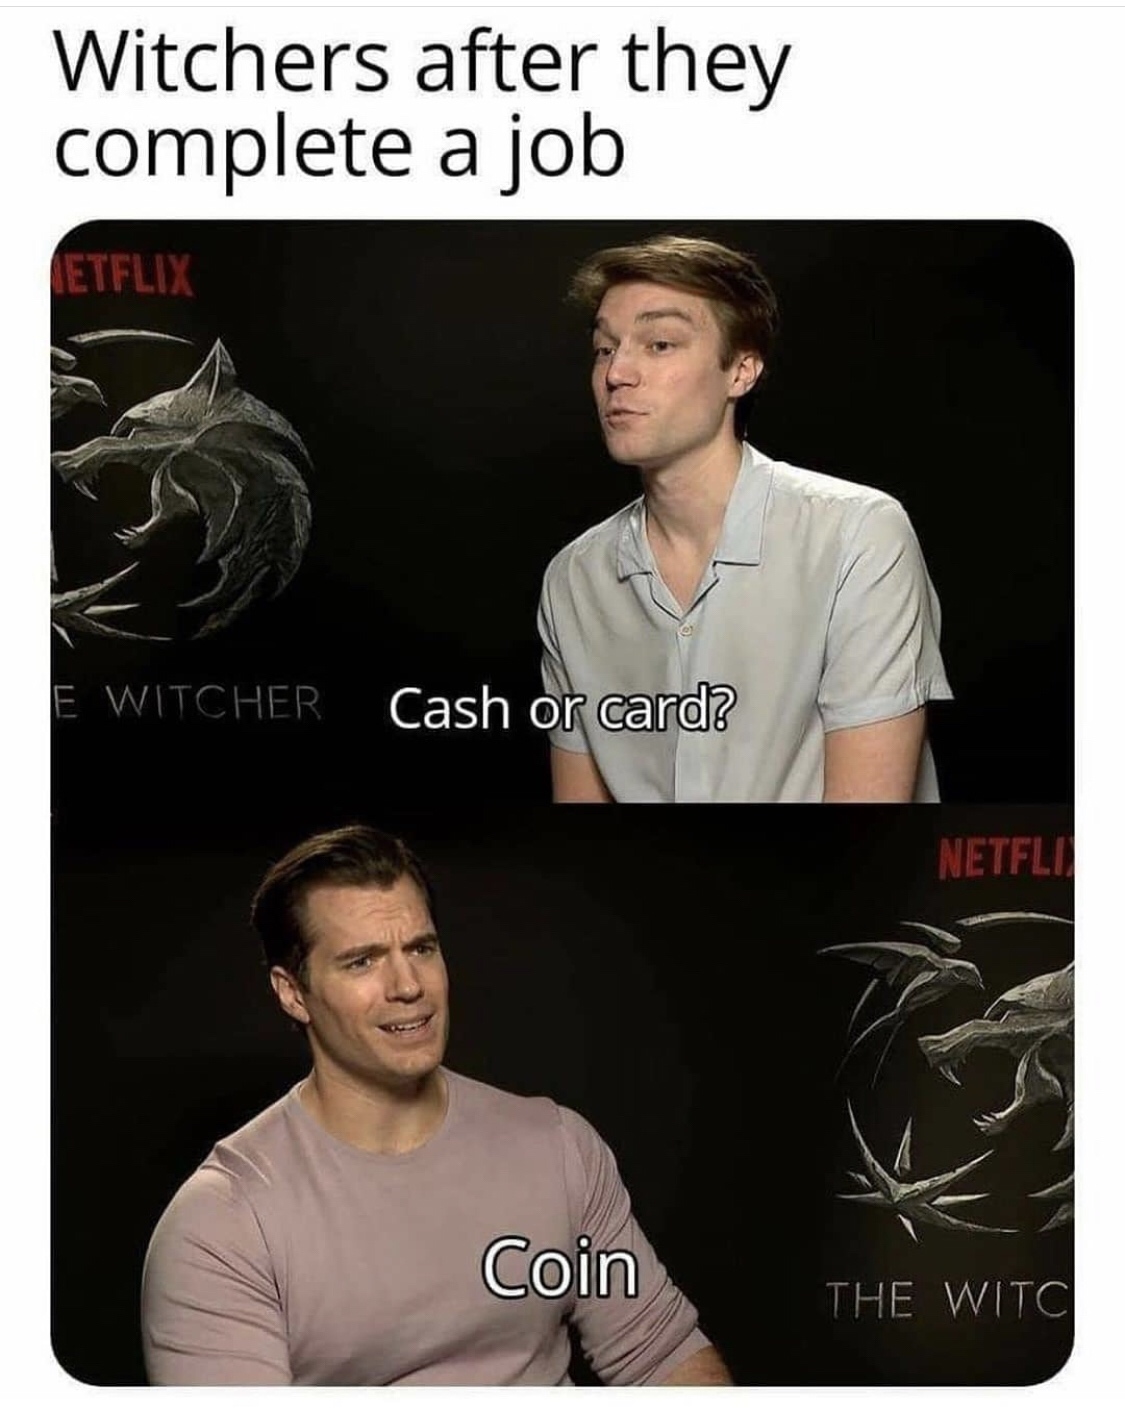 witcher meme - Witchers after they complete a job Netflix E Witcher Cash or card? Netfli Coin The Witch